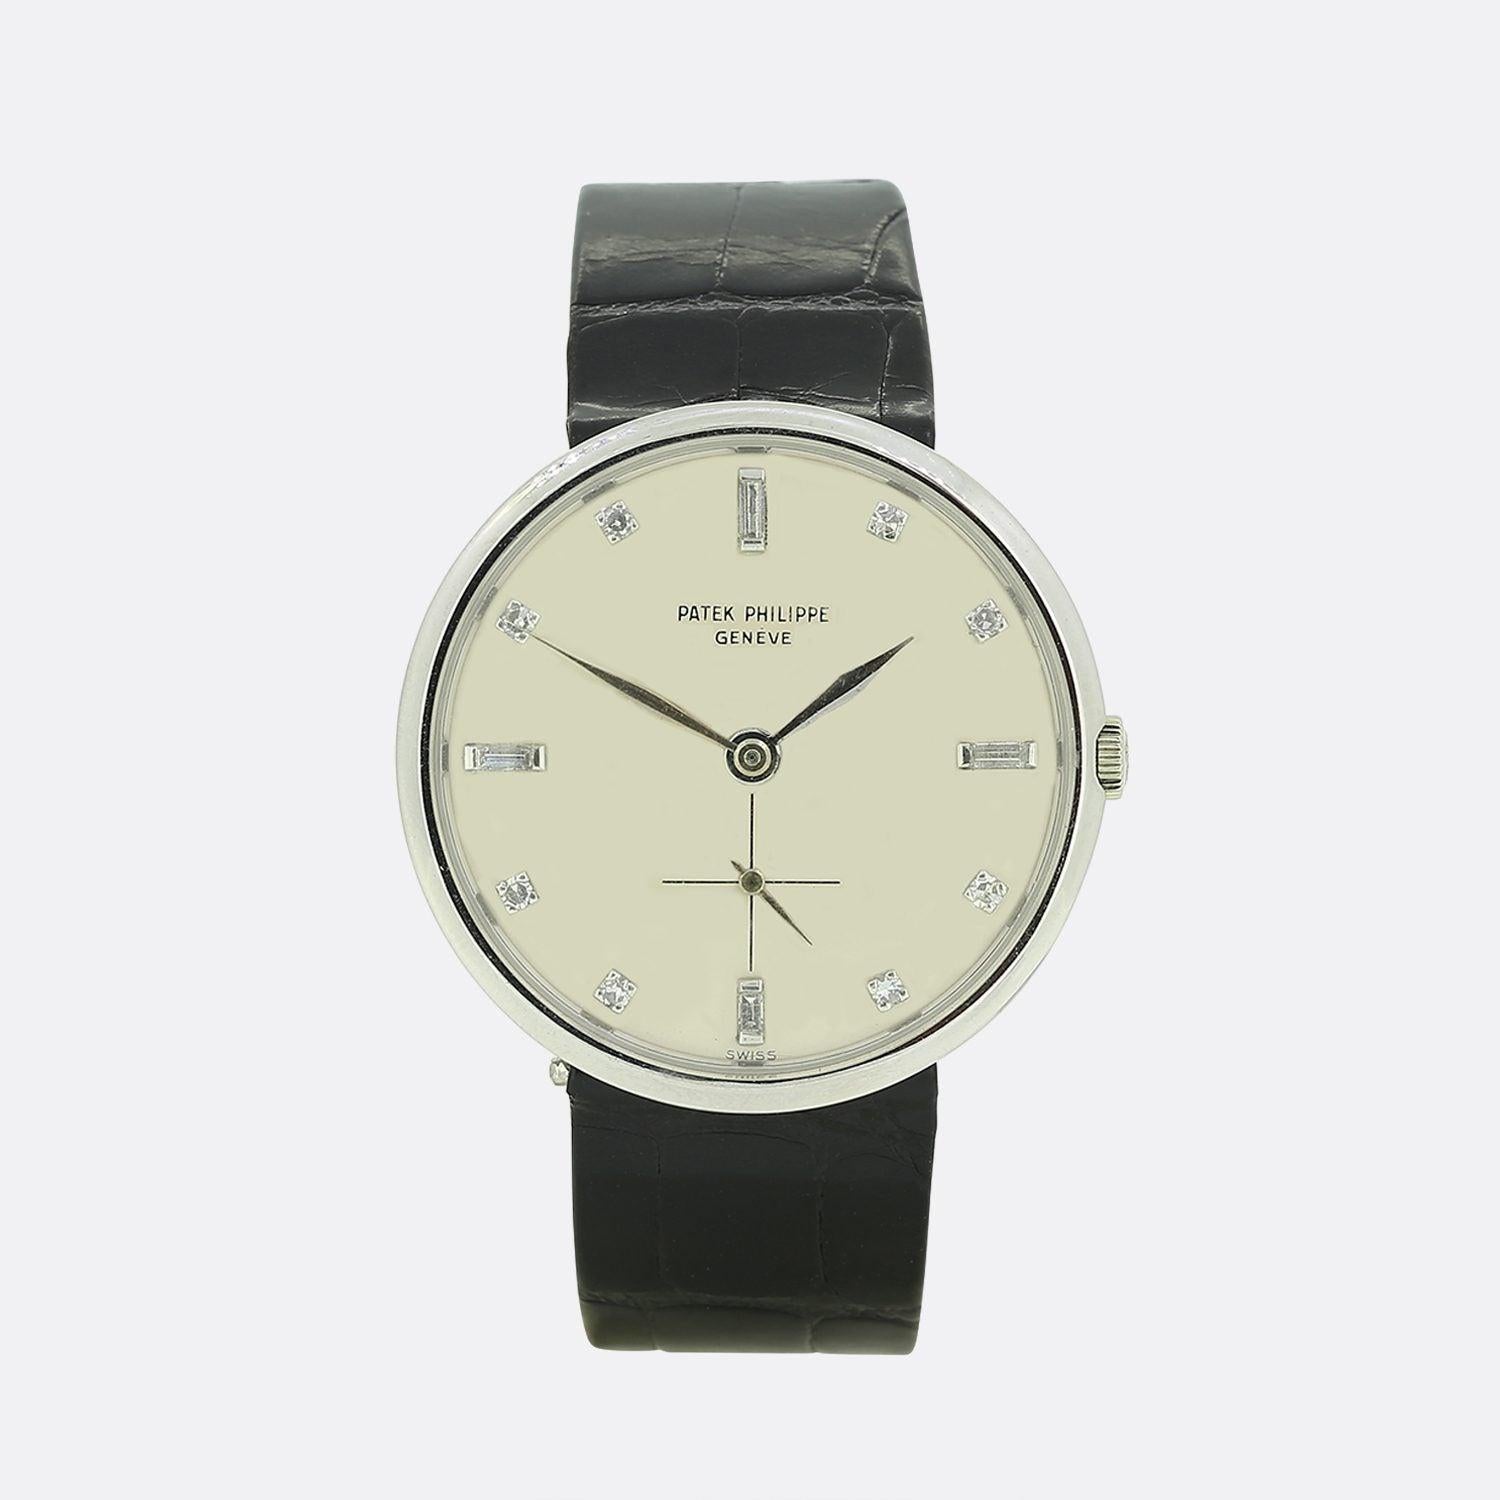 This is a wonderful and rare 1960s gents Patek Philippe wristwatch. The watch features a silver dial with white hour and minute hands and a seconds subdial at 6 o'clock. The case is 18ct white gold and the watch has been finished with a Patek